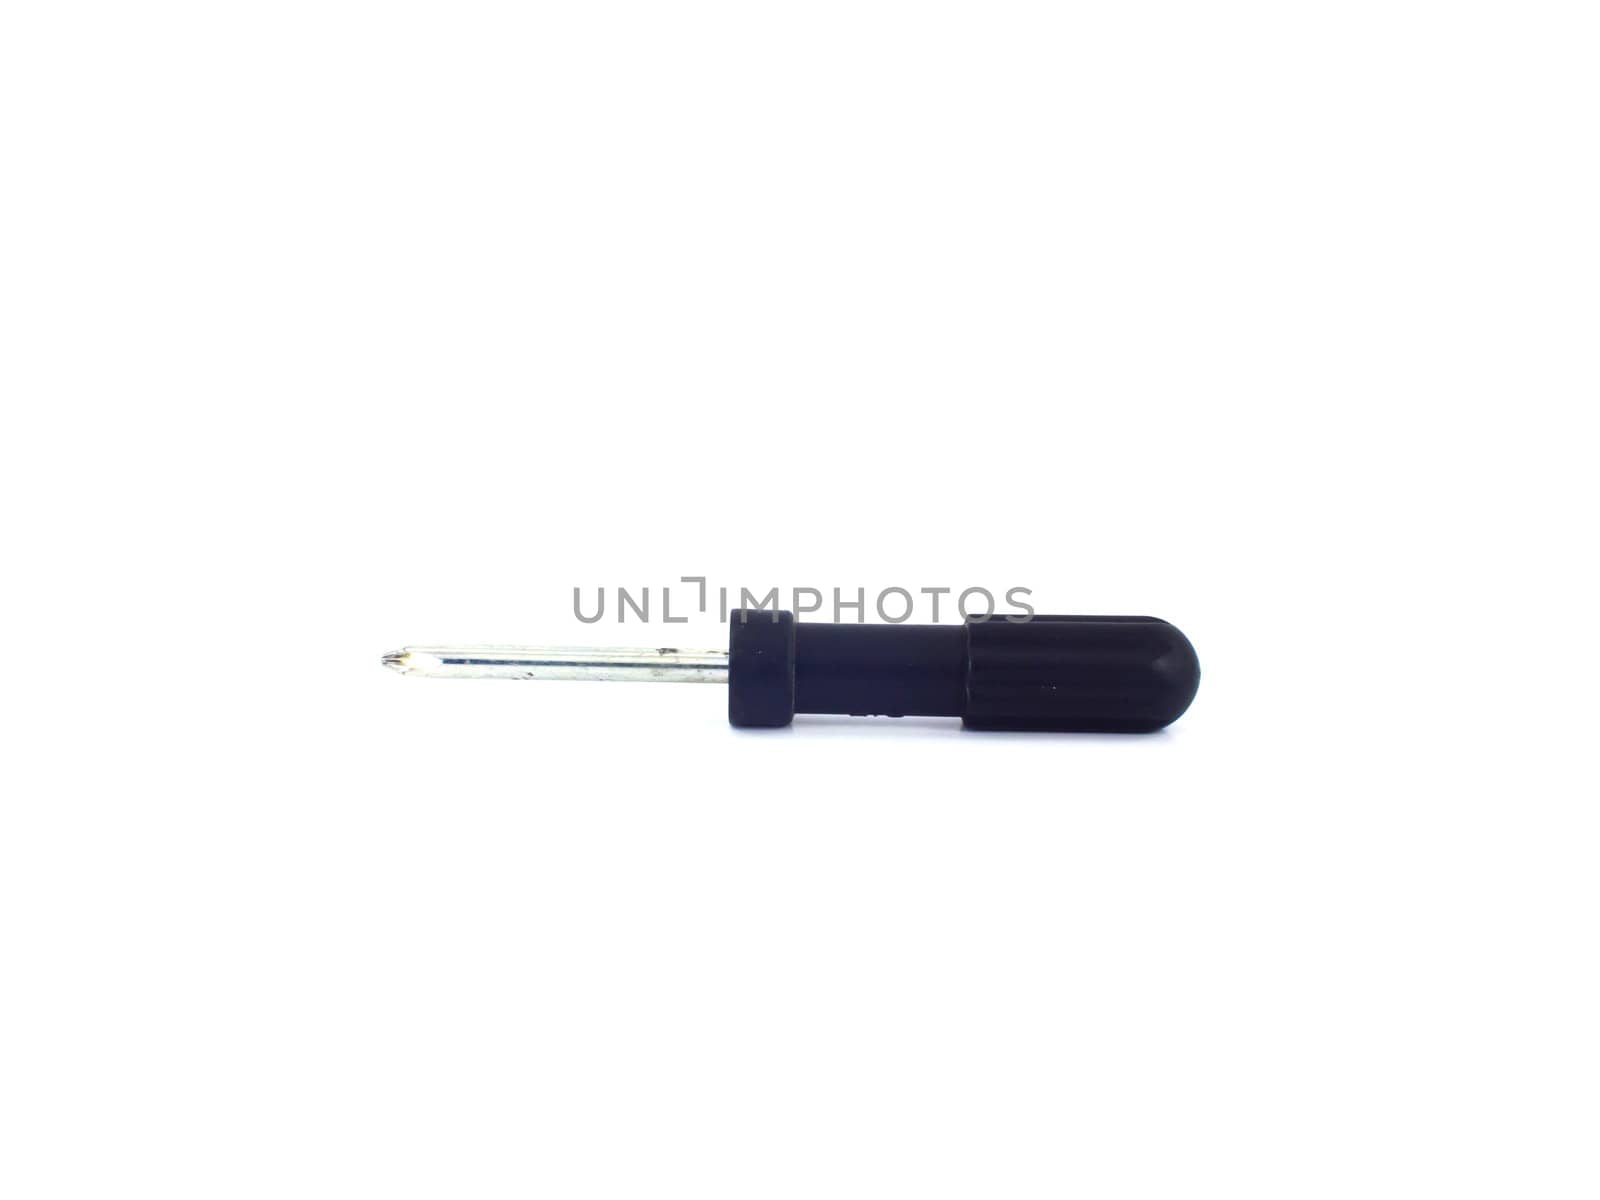 This is a Screwdriver on white background